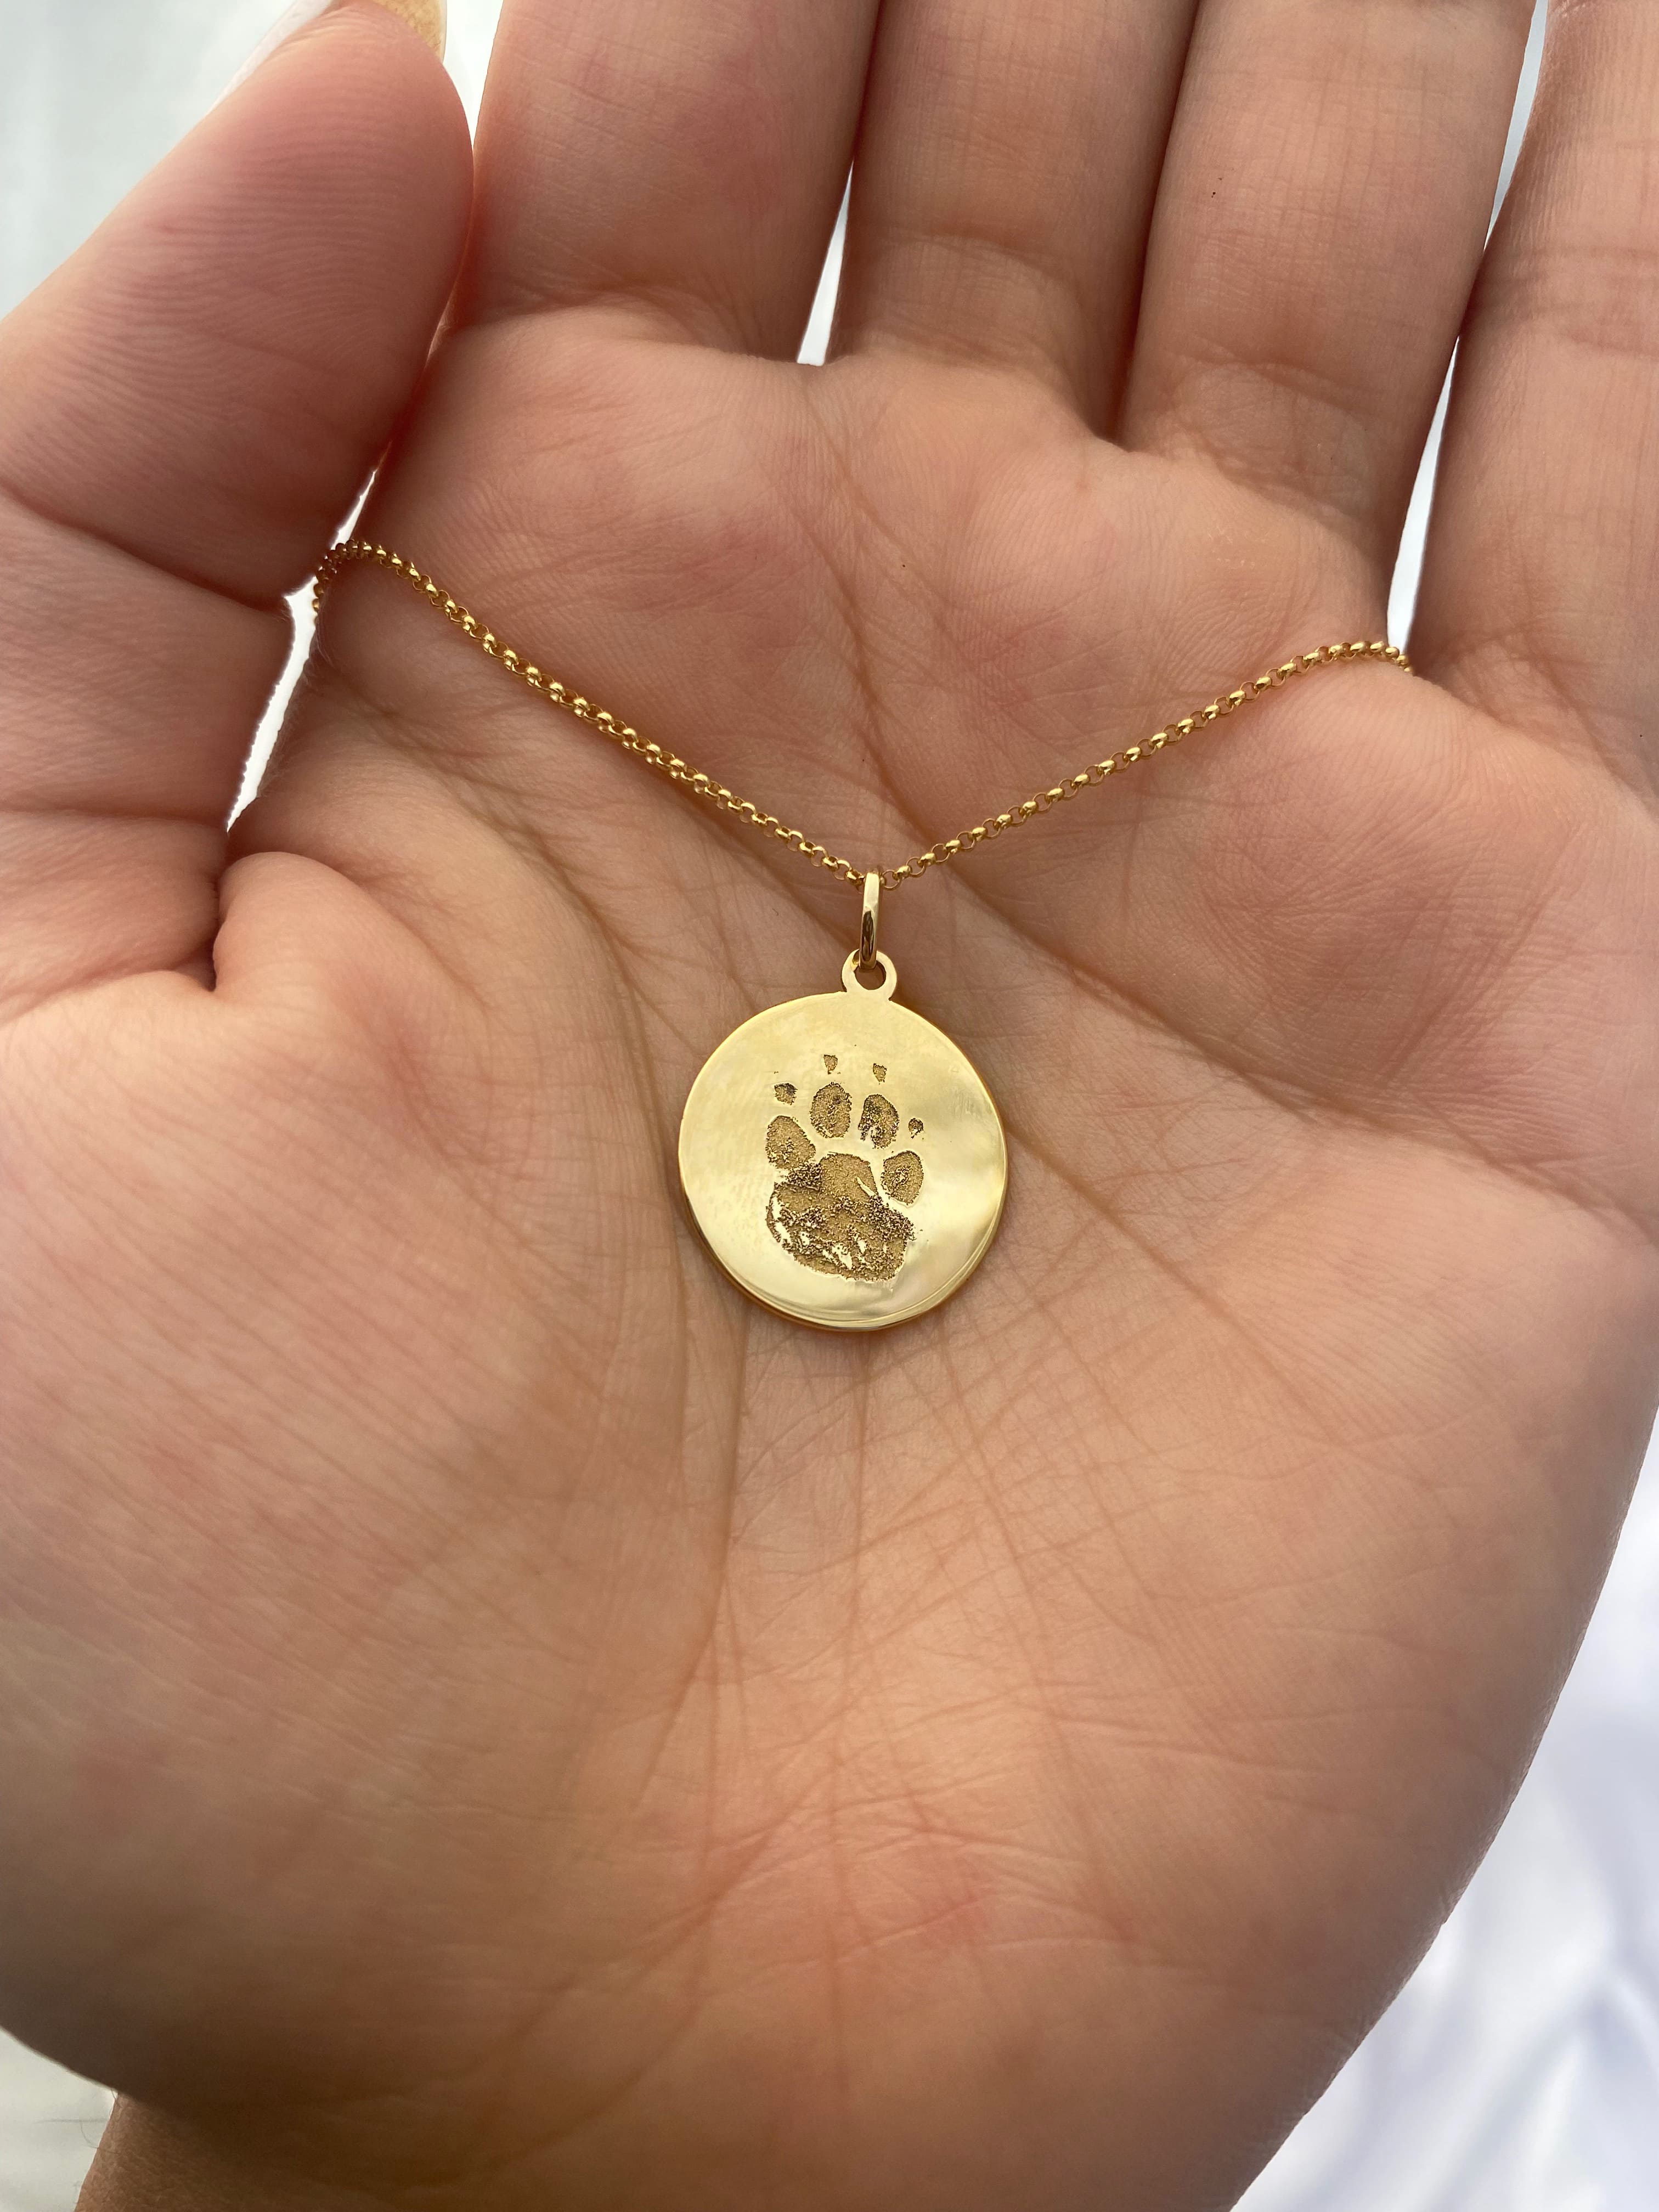 Paw Print Engraving Coin Necklace